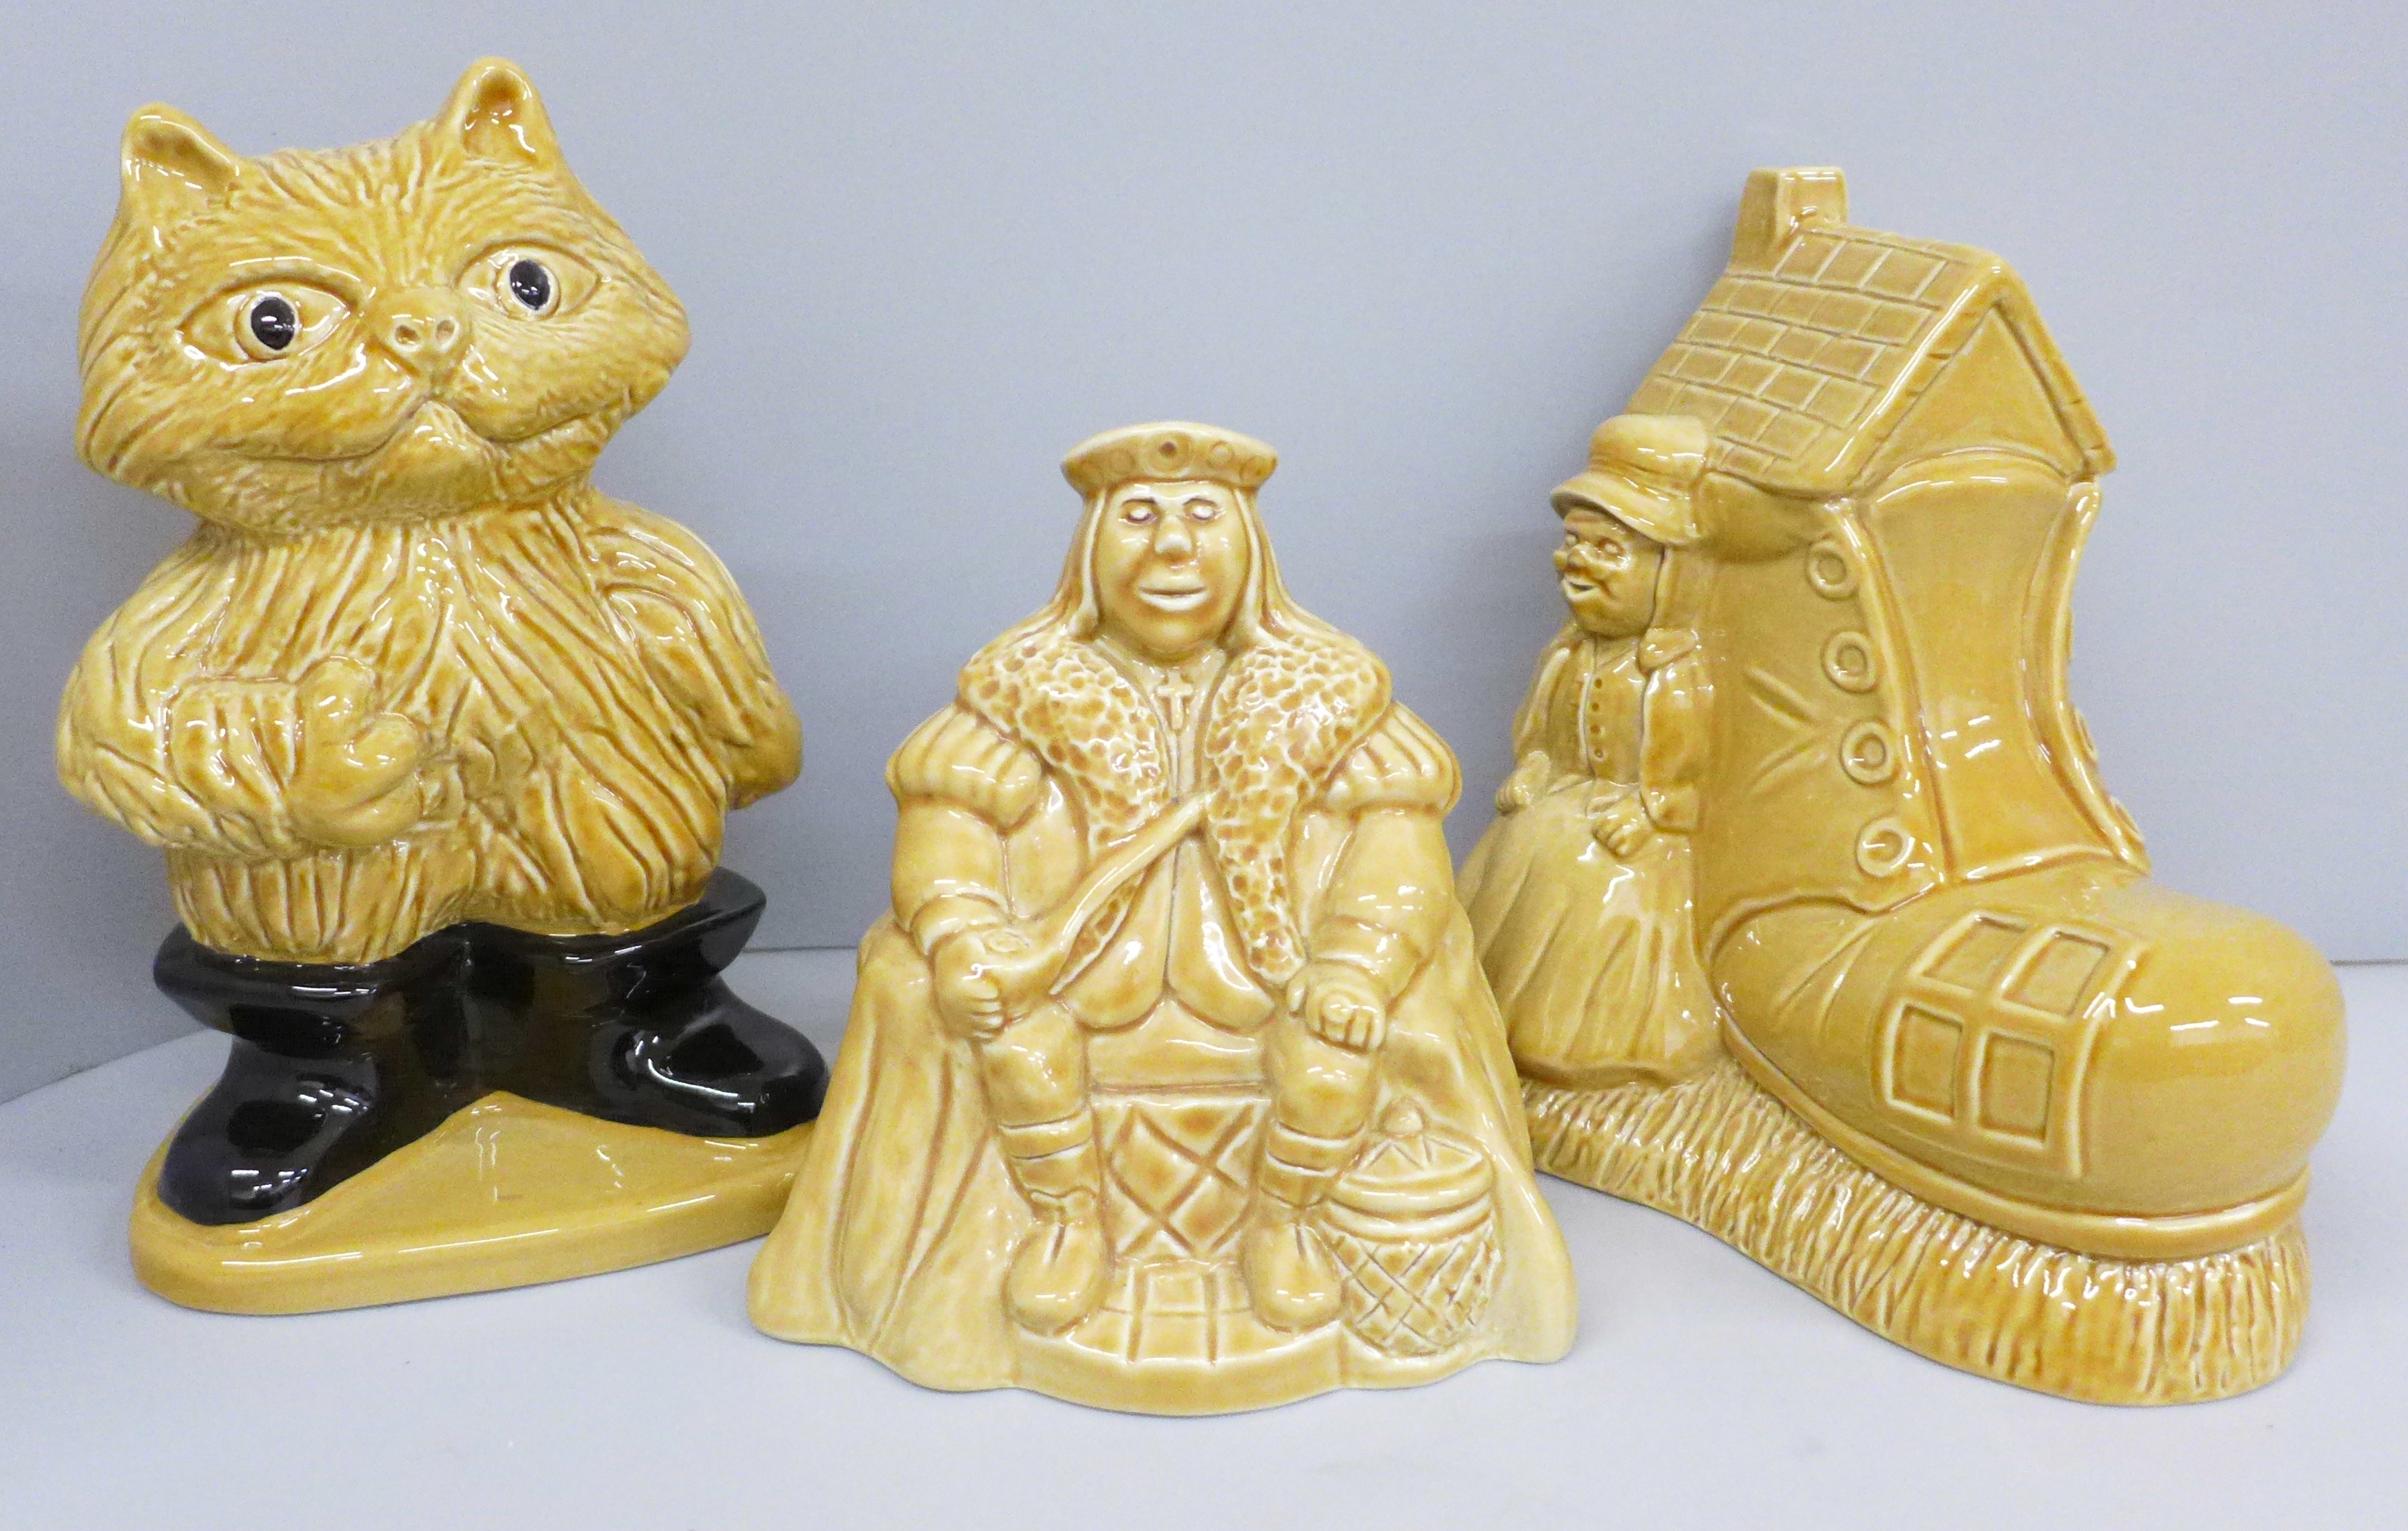 Three Wade nursery rhyme money boxes, Old King Cole, Puss In Boots, Old Woman in Shoe